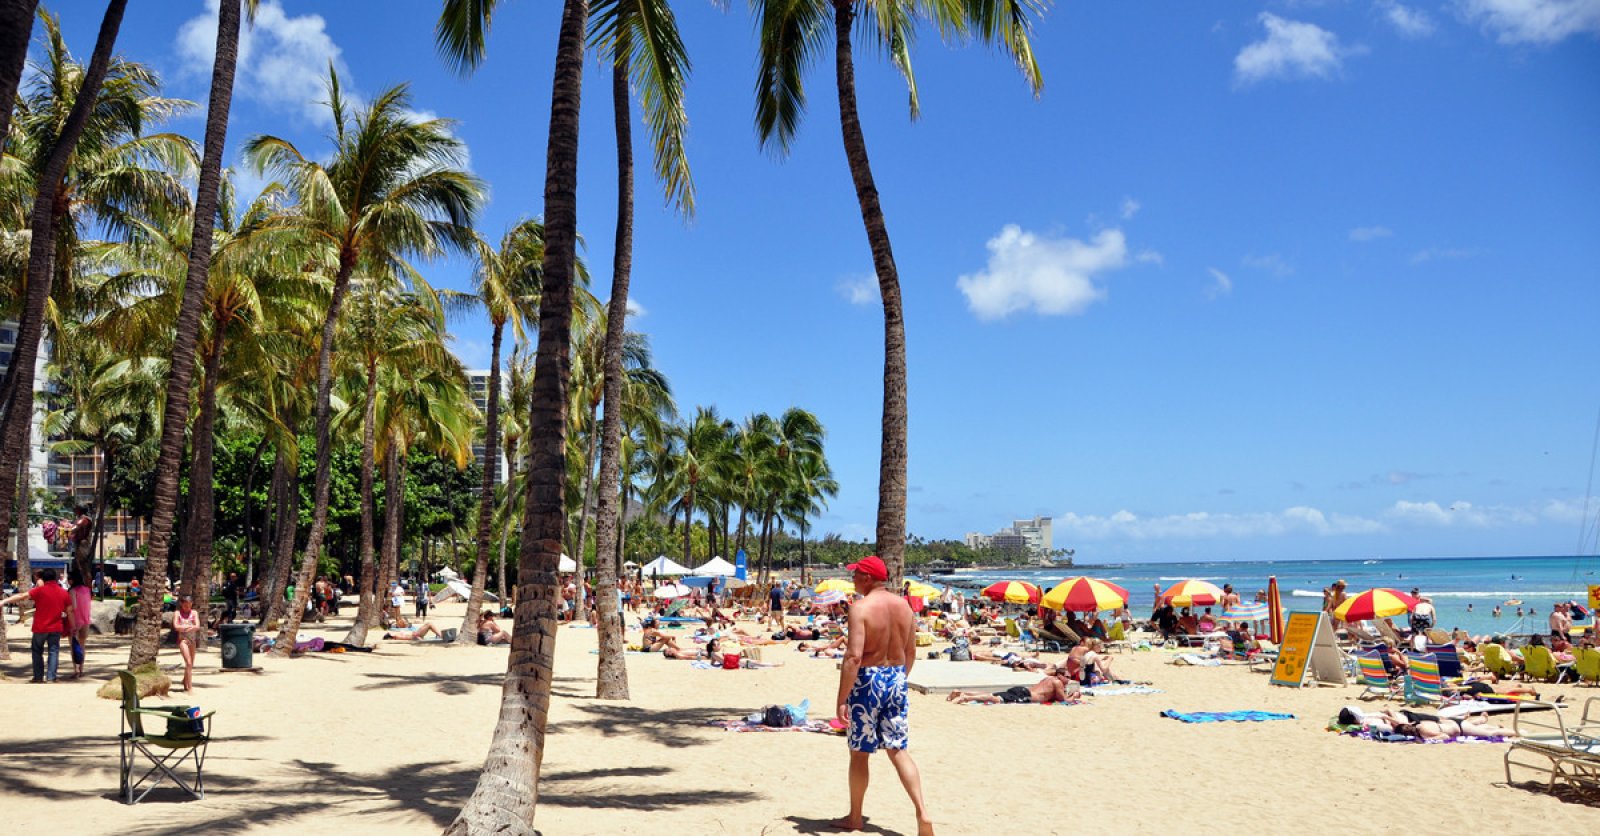 Honolulu's Waikiki Beach is a great place to soak in the rays